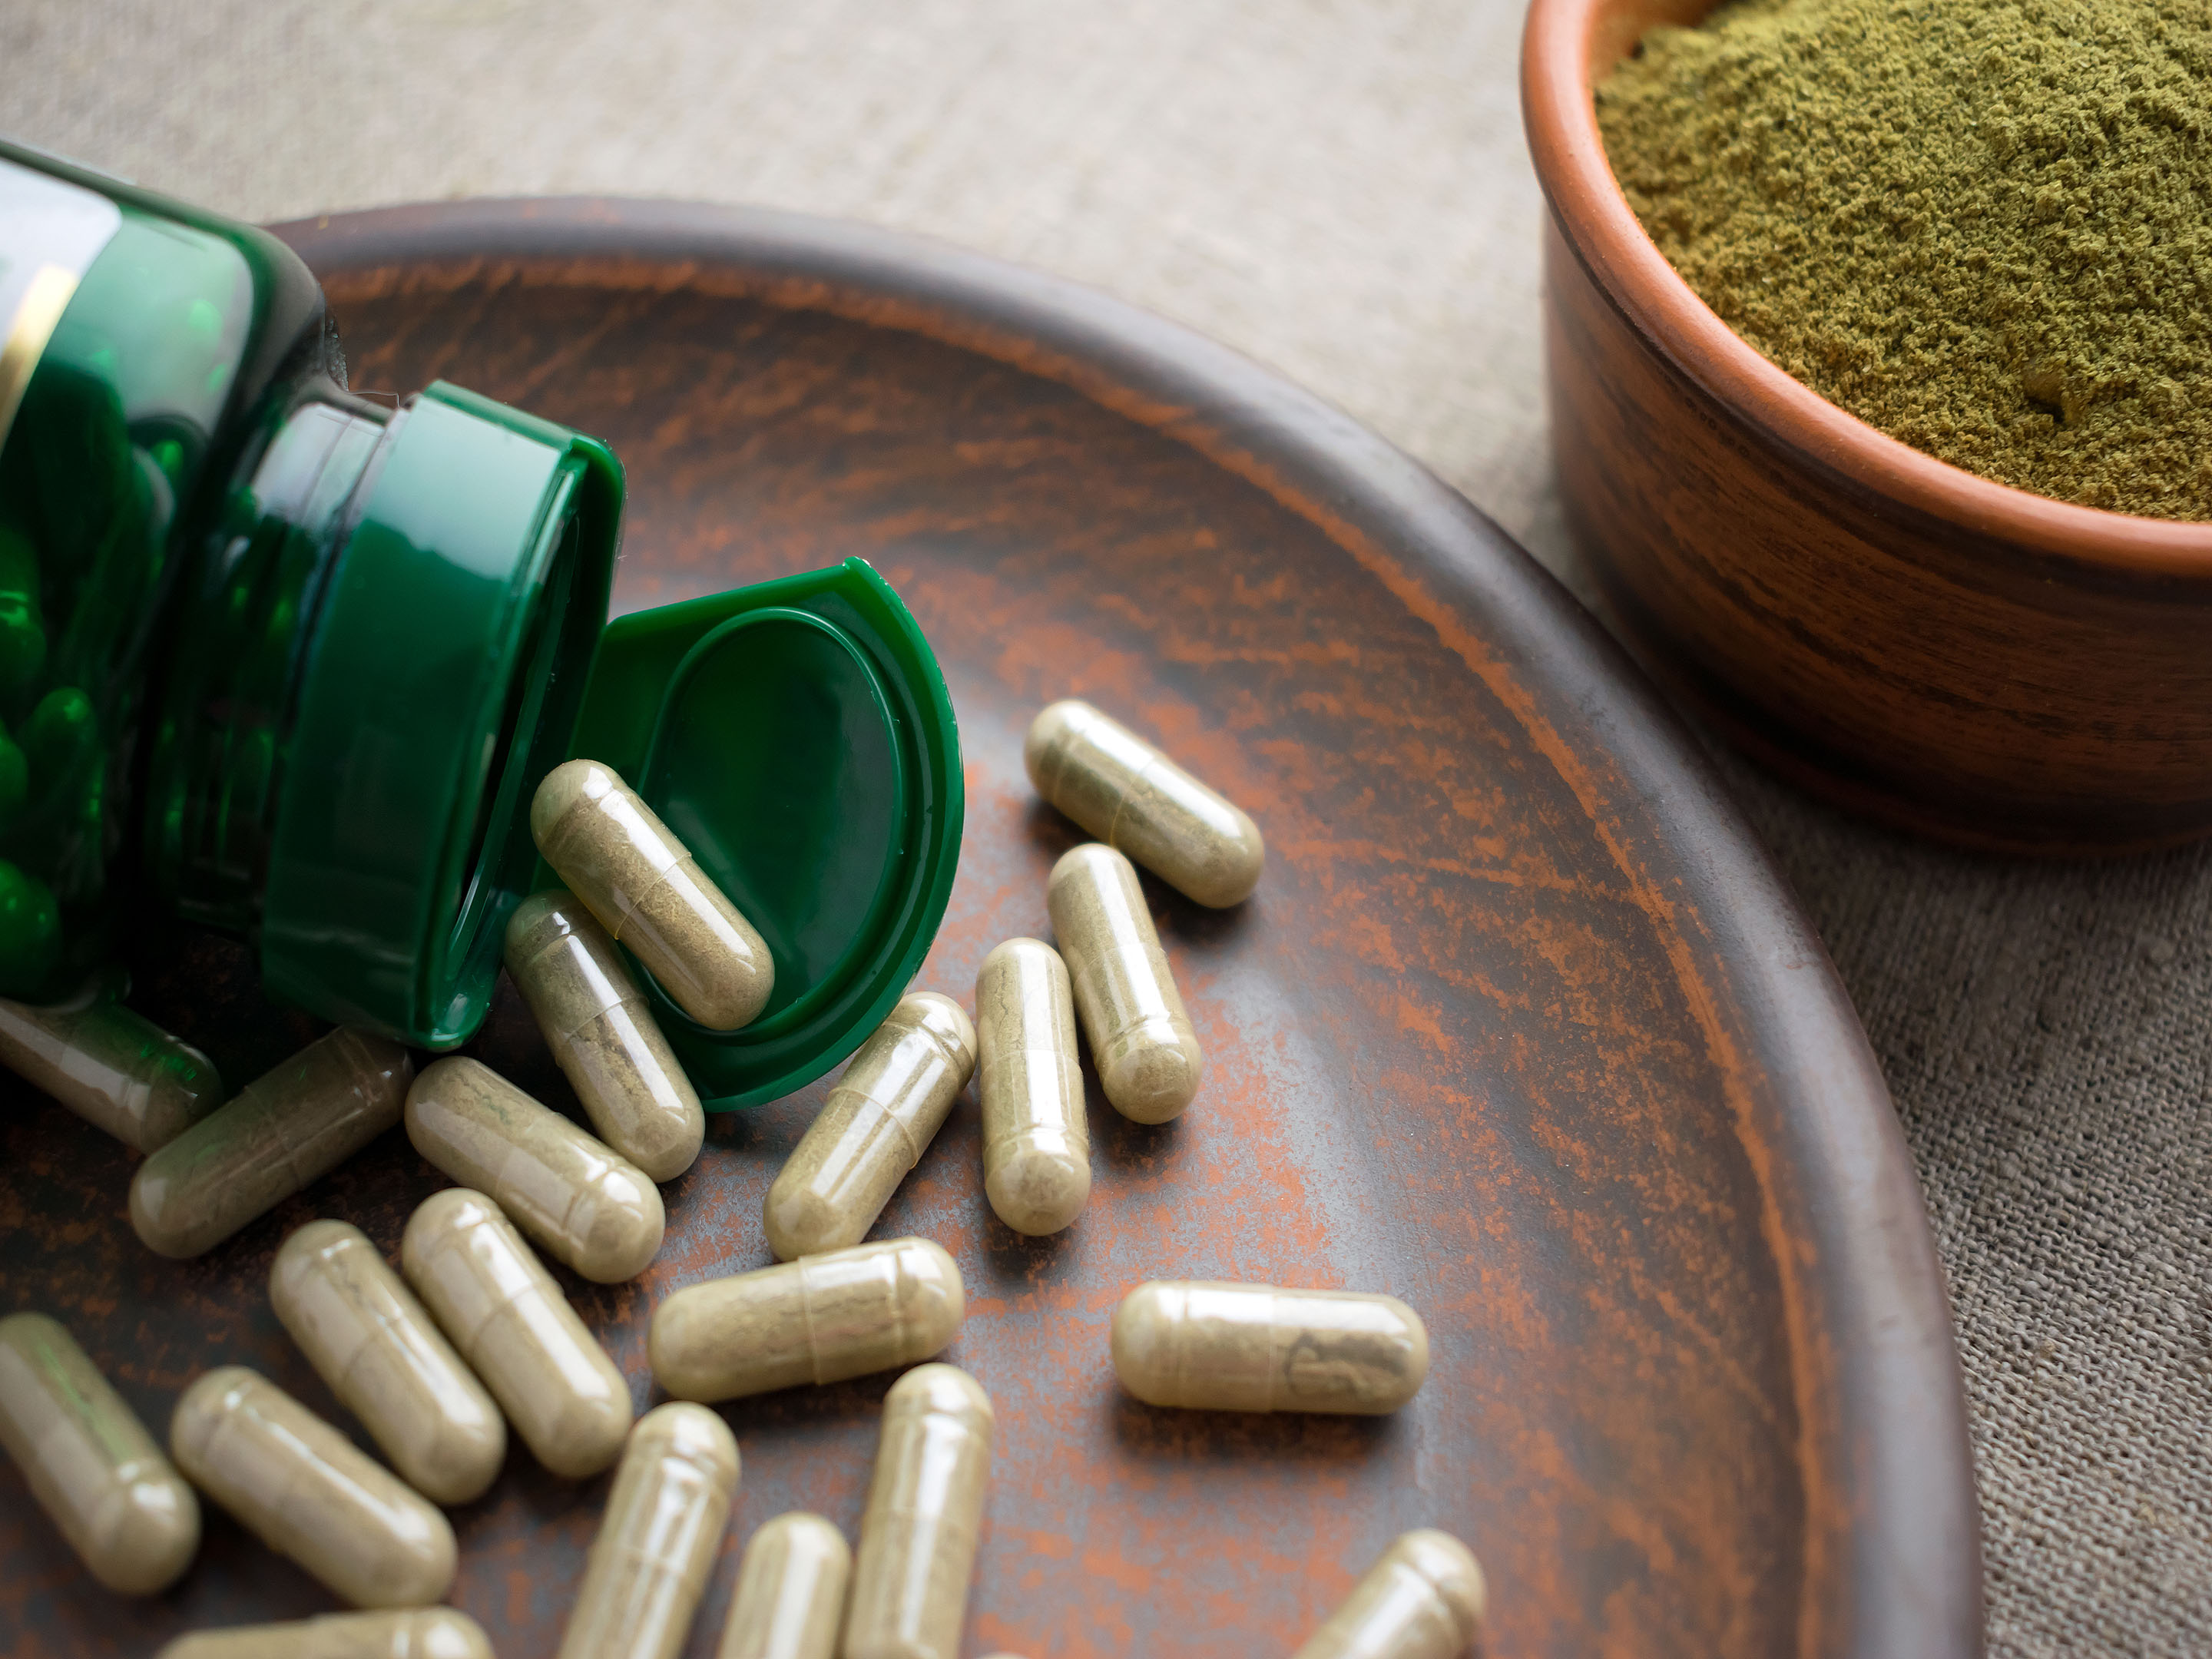 Green Tea Extract May Harm Liver in People With Certain Genetic ...